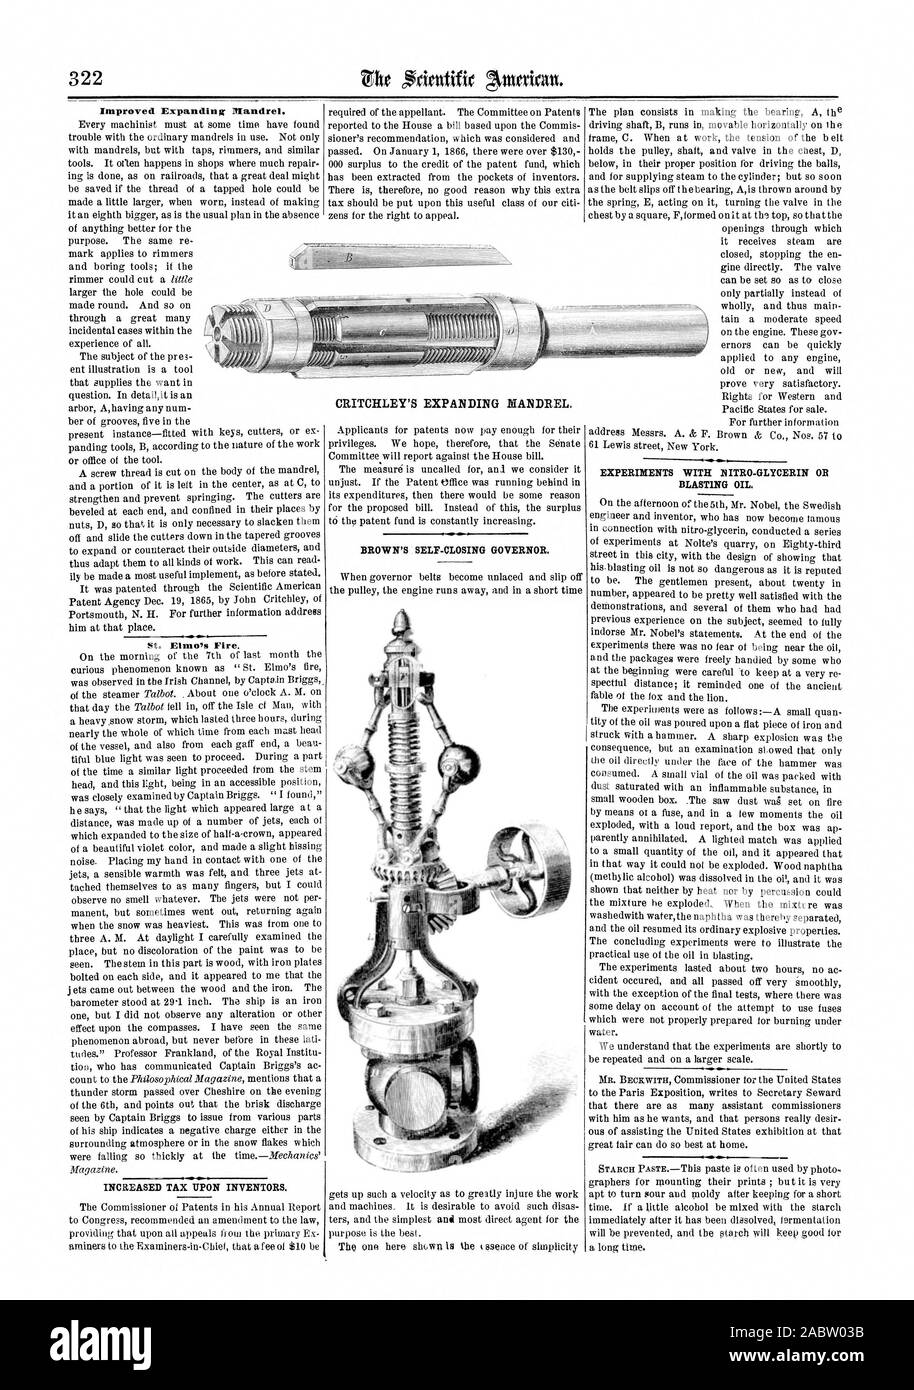 Improved Expanding Mandrel. St. Elmo's Fire. CRITCHLEY'S EXPANDING MANDREL., scientific american, 1866-05-12 Stock Photo